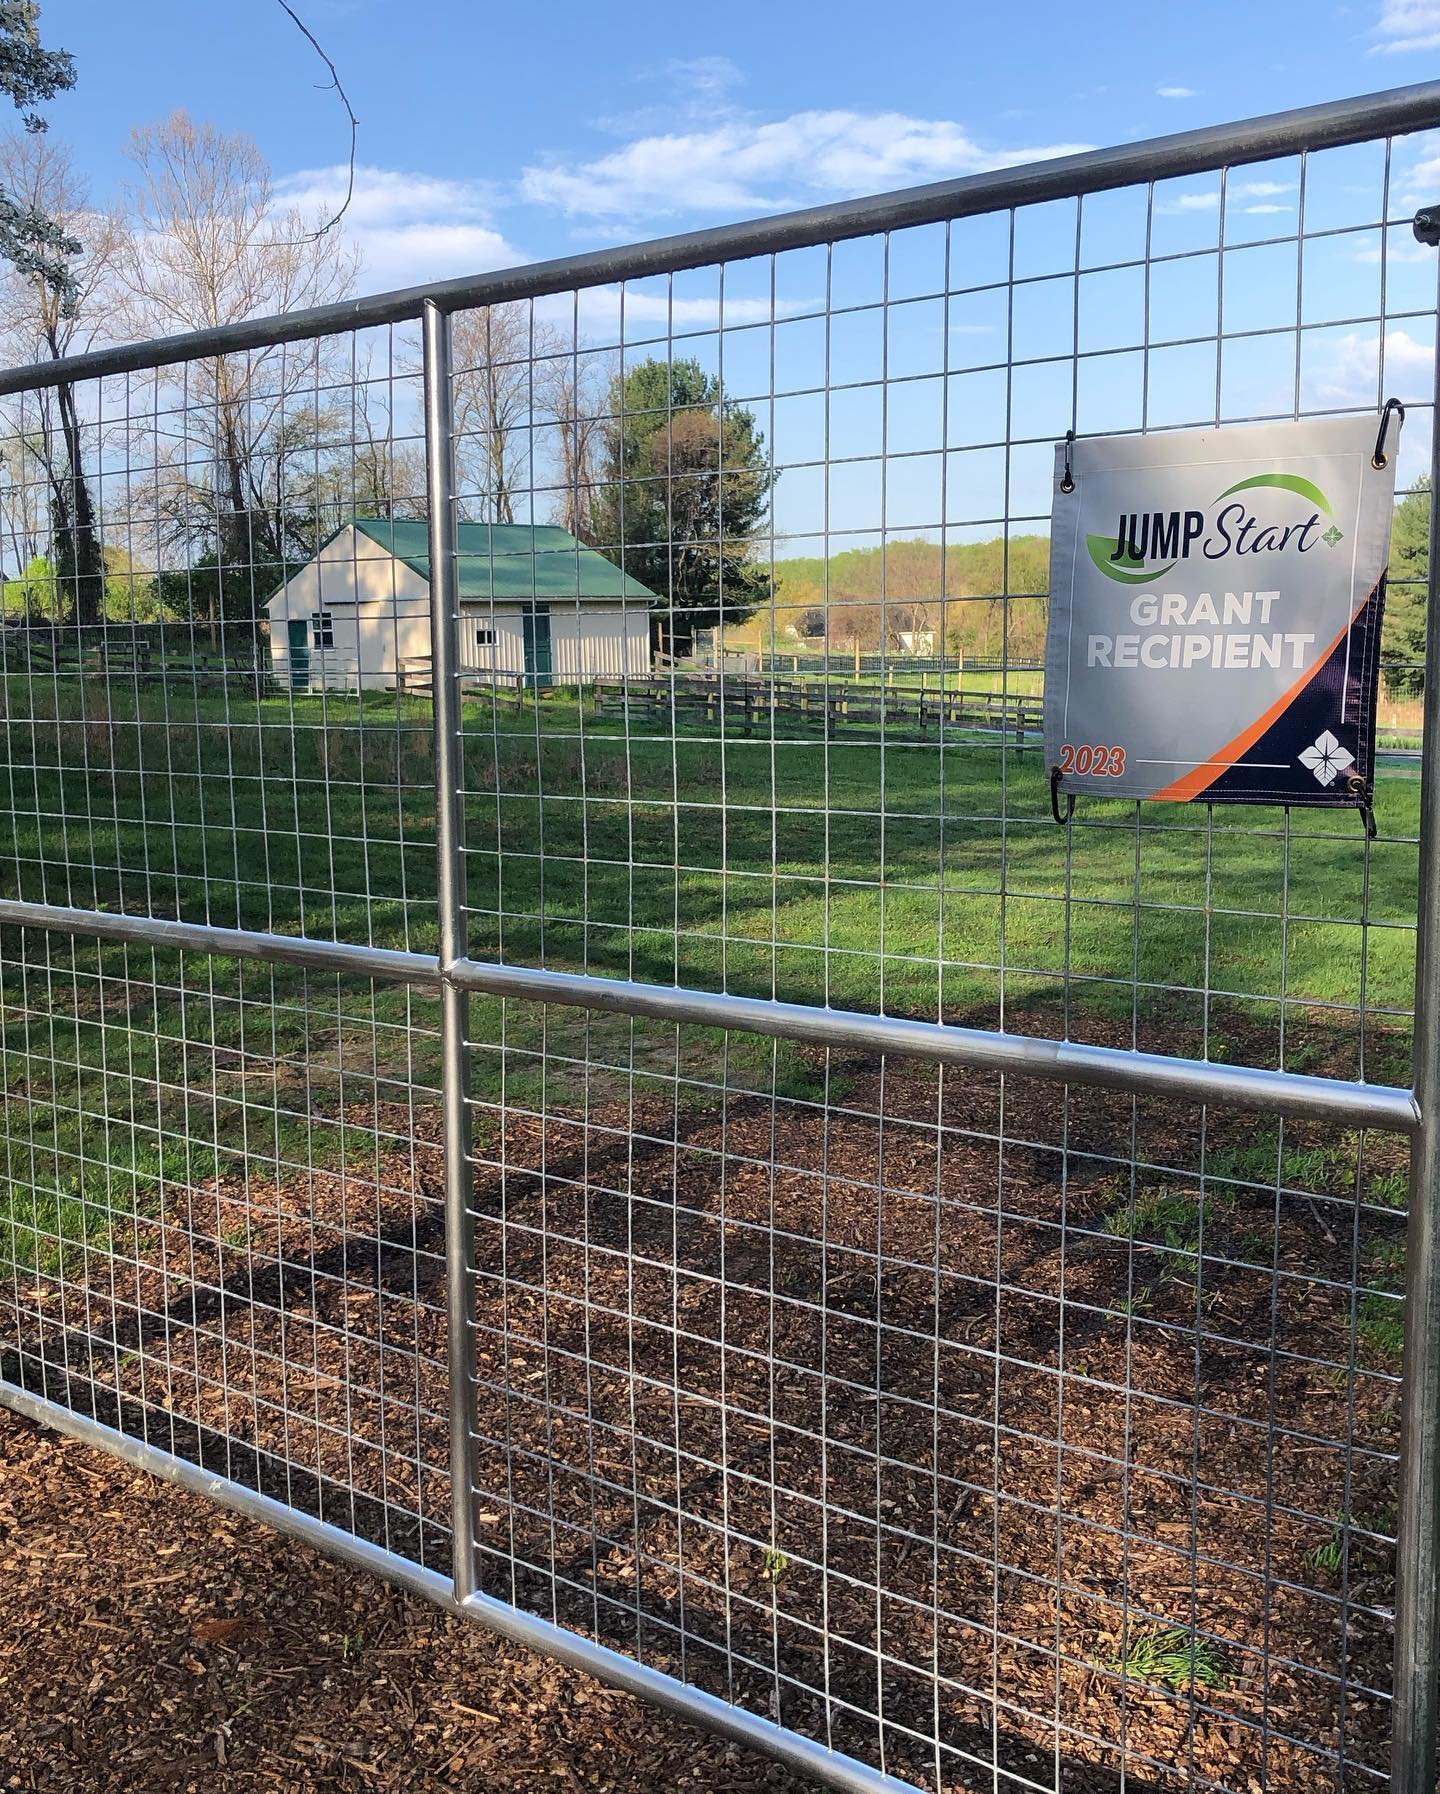 We are so grateful to have received funding to help install this beautiful deer fence. The jumpstart grant is so aptly named. This was such a huge game changer getting our new farm (and seeds) off the ground. Everyone is ecstatic, except for the deer